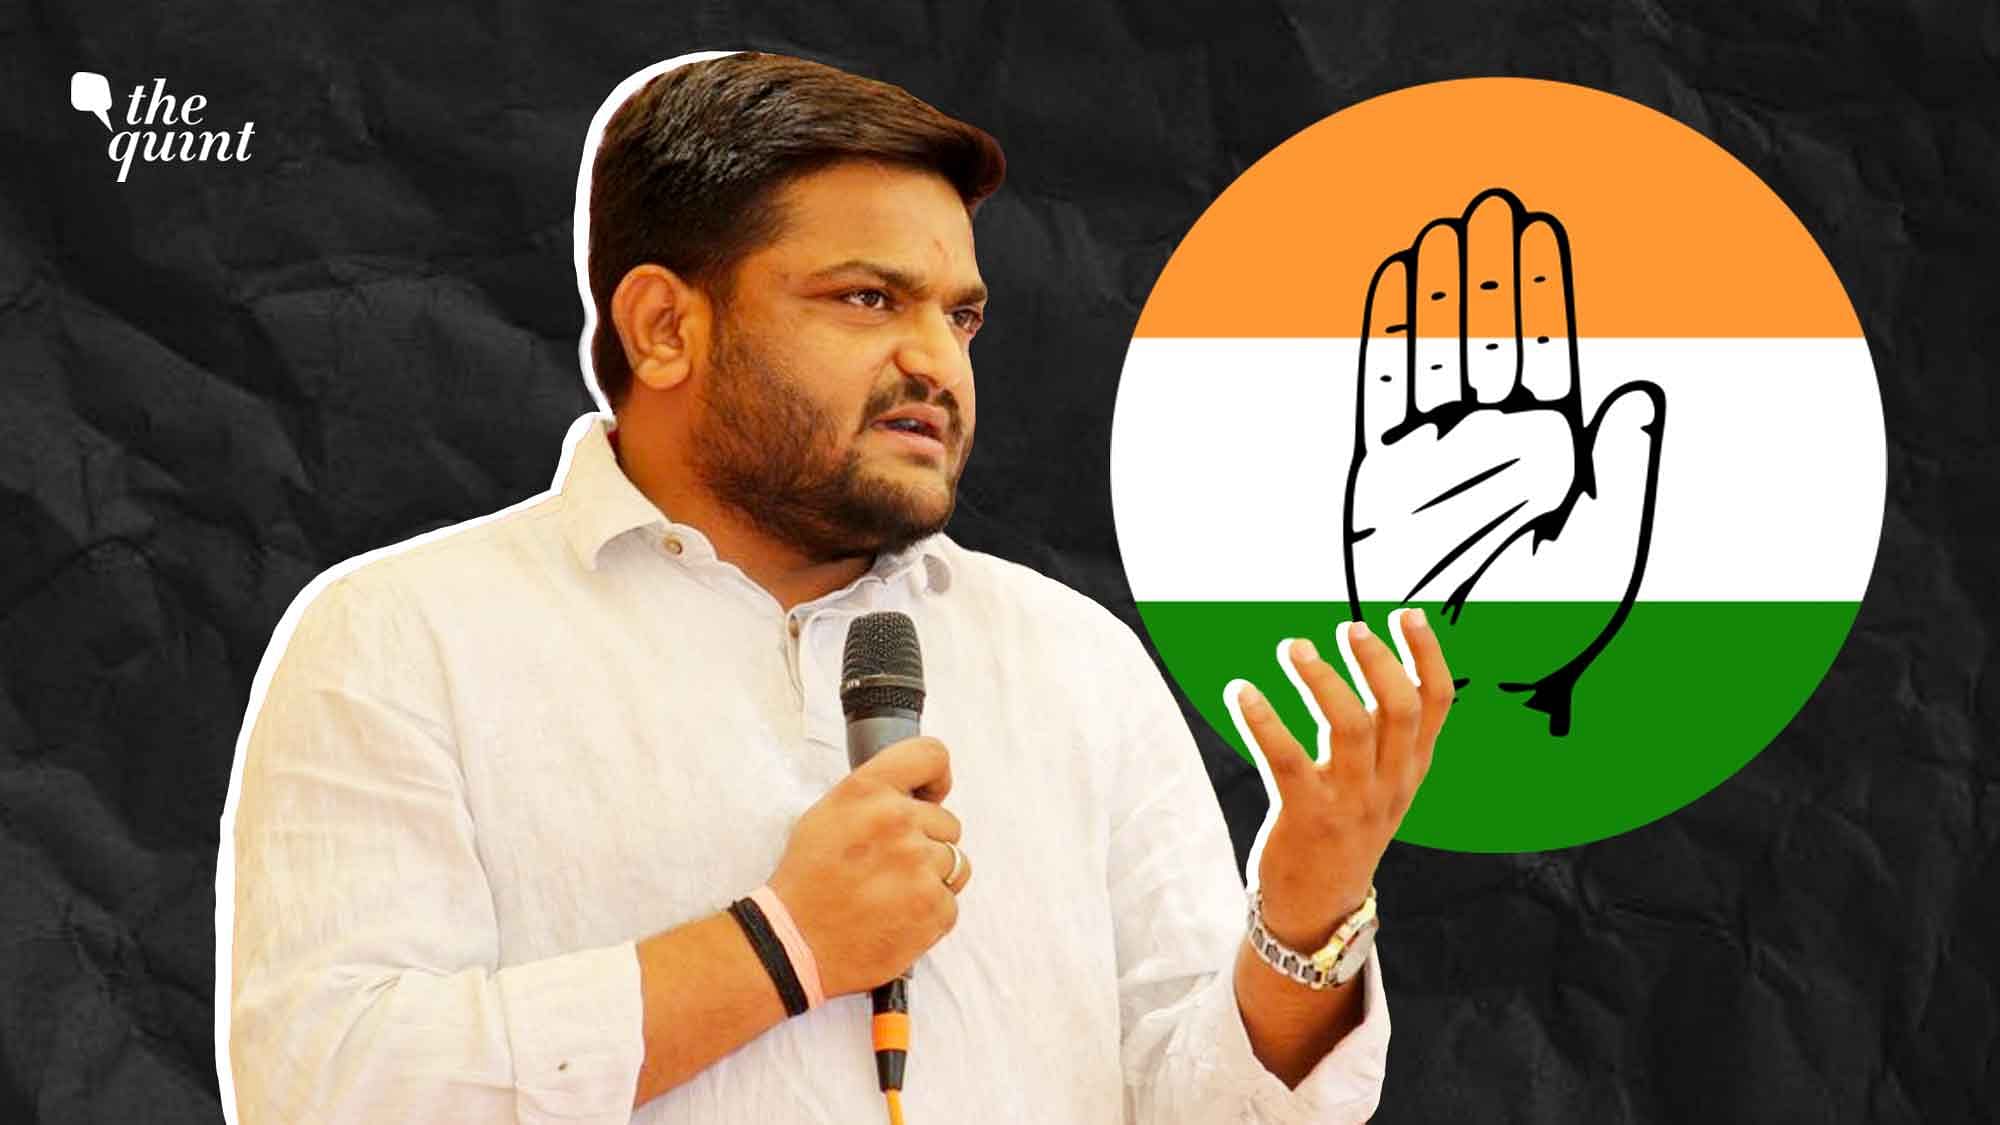 <div class="paragraphs"><p>Hardik Patel's three-year stint in the <a href="https://www.thequint.com/topic/congress-party">Congress party</a> came to an end on Wednesday, 18 May, as he announced his <a href="https://www.thequint.com/news/politics/hardik-patel-resigns-from-congress-months-ahead-of-gujarat-elections">resignation</a> by posting a letter on Twitter.</p></div>